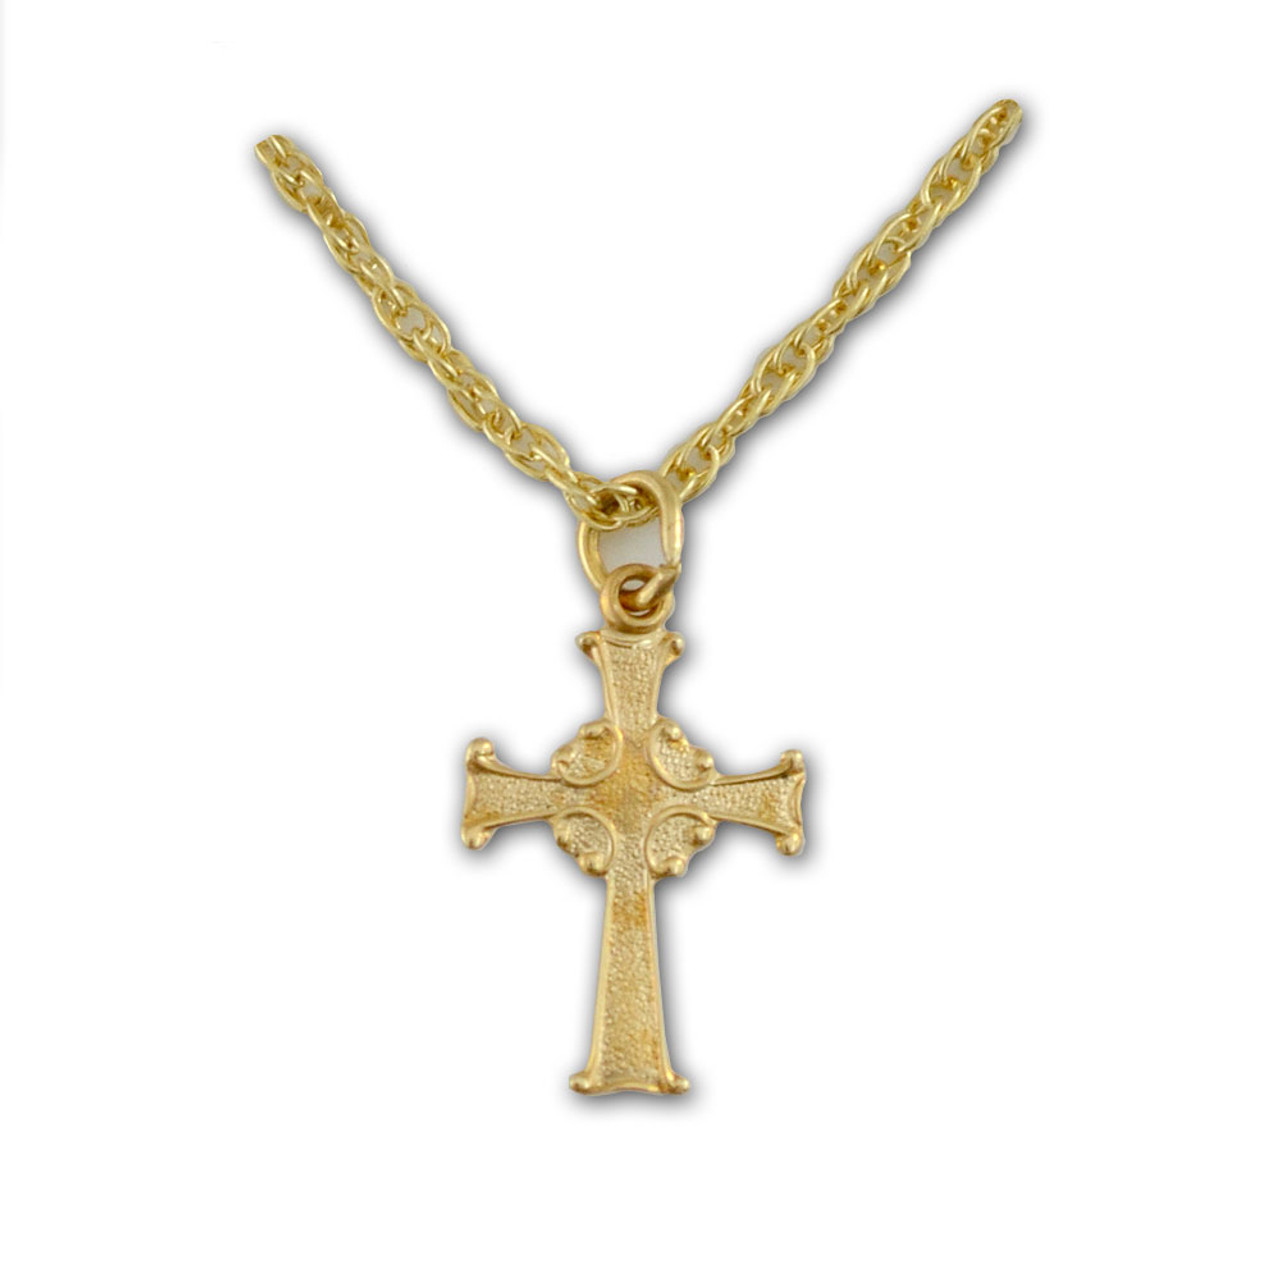 Min cross sideways charm necklace in solid karat 10K, 14K or 18K Gold.  Necklace can be made for child or adult.